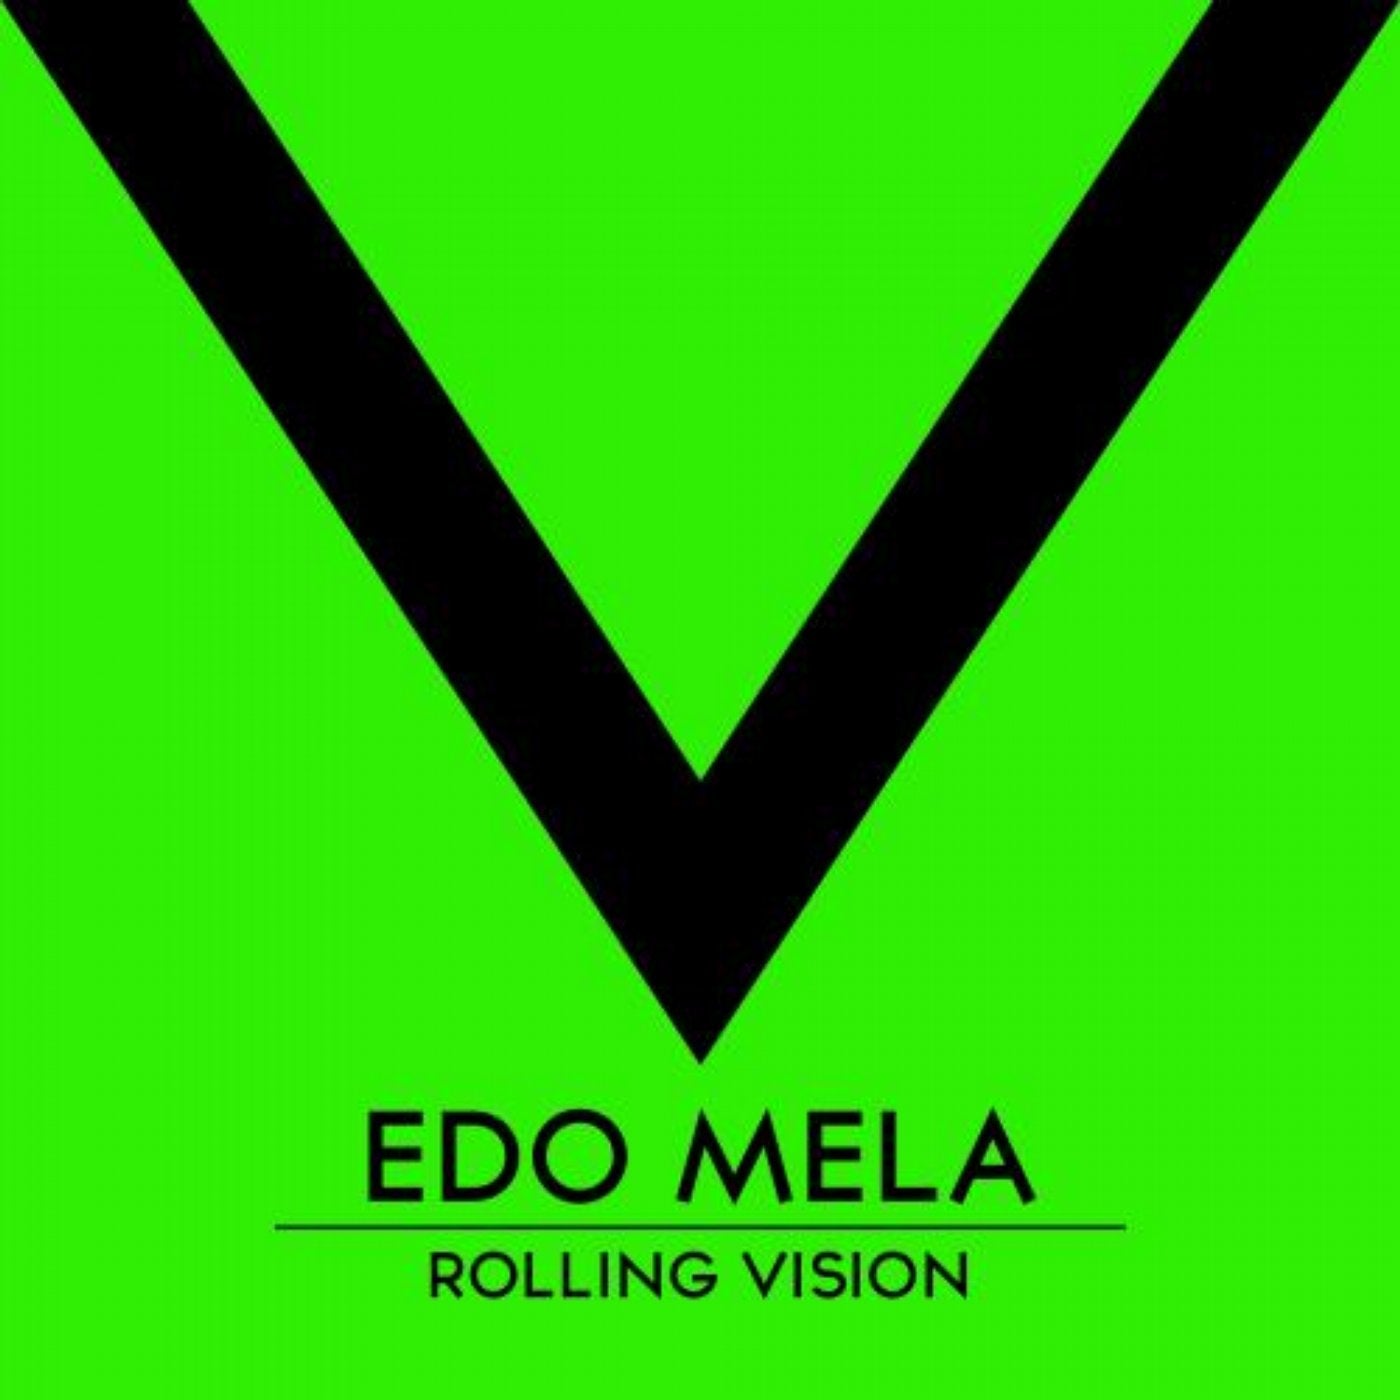 Rolling Vision